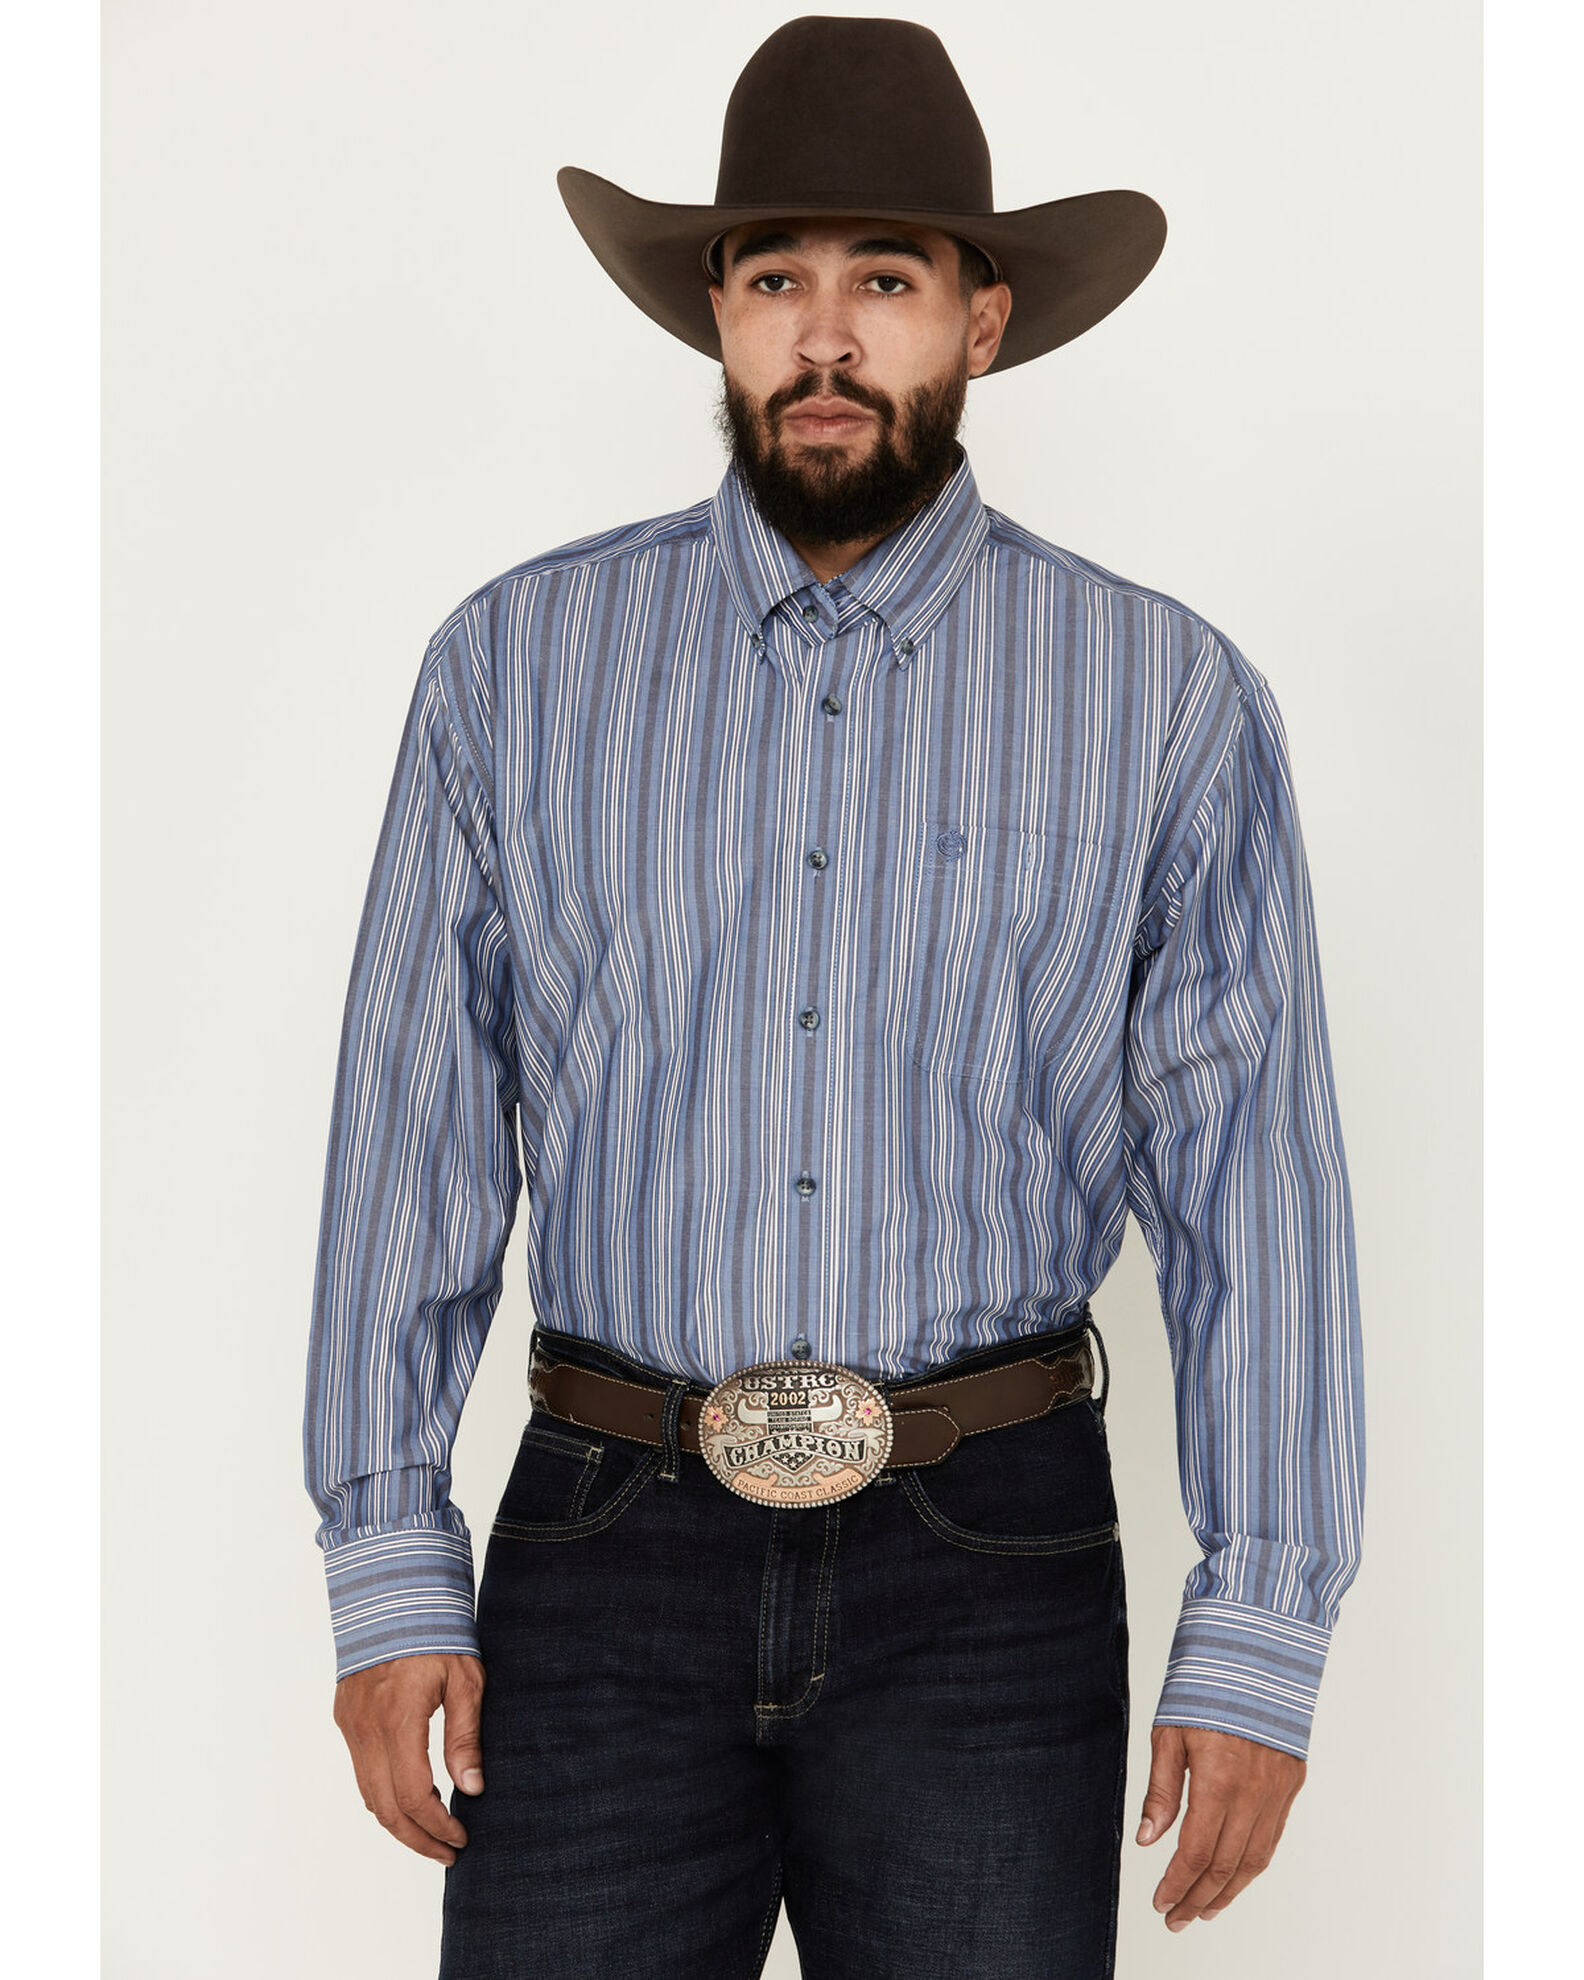 George Strait by Wrangler Men's Striped Long Sleeve Button-Down Western Shirt